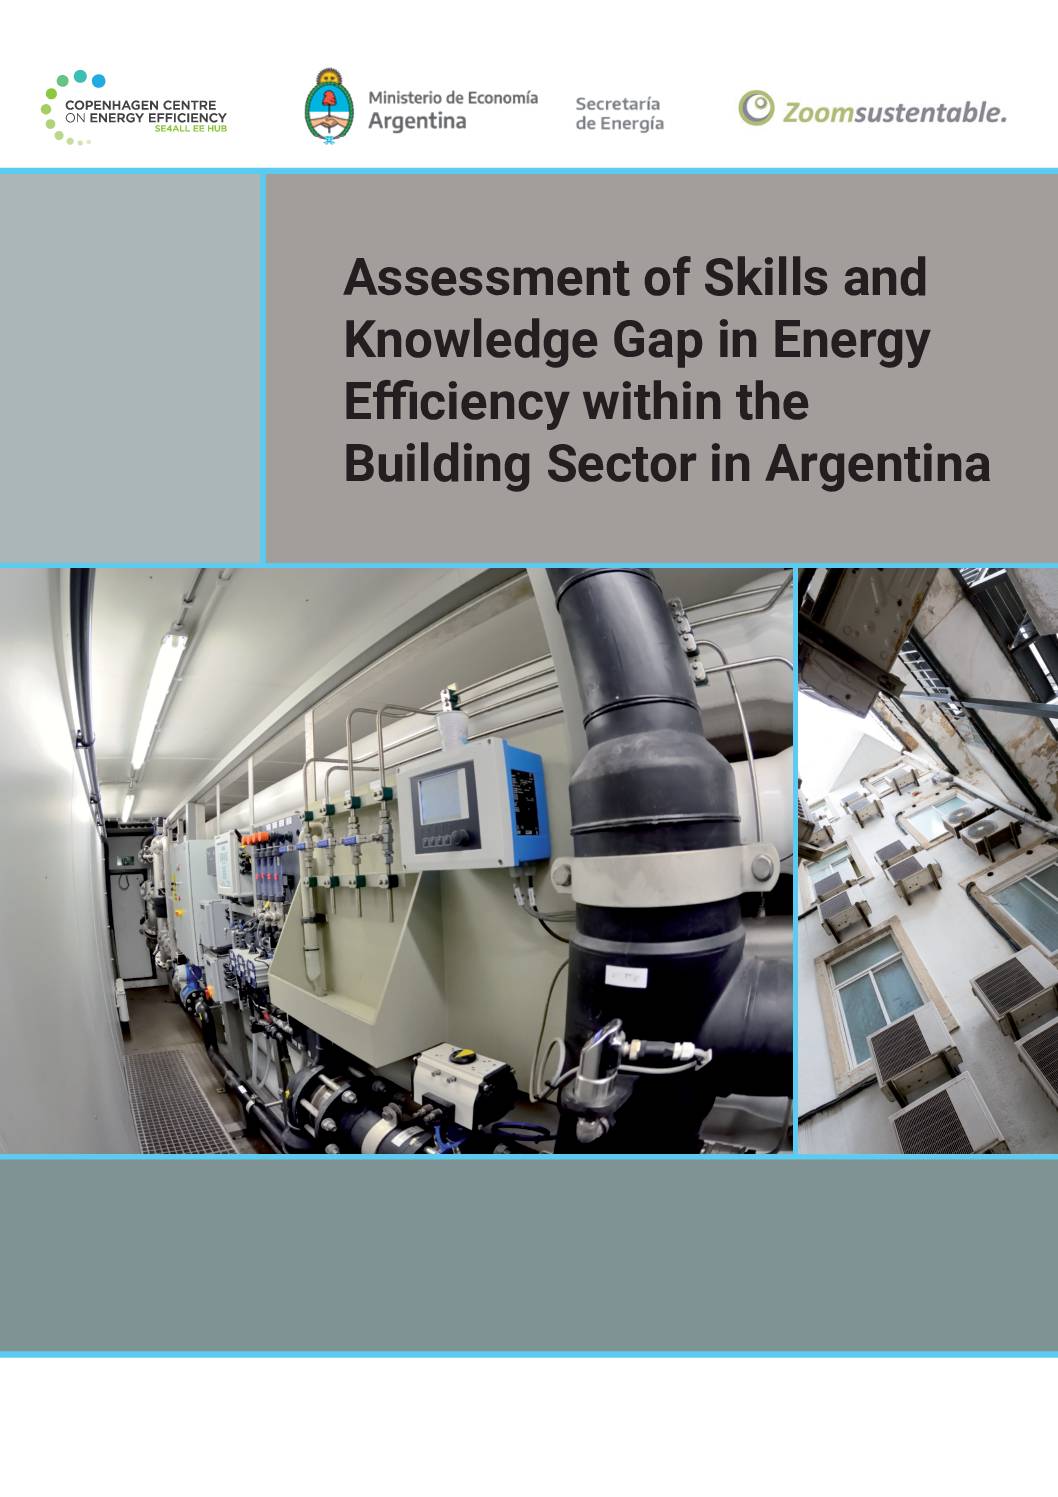 Assessment of Skills and Knowledge Gap in Energy Efficiency within the Building Sector in Argentina